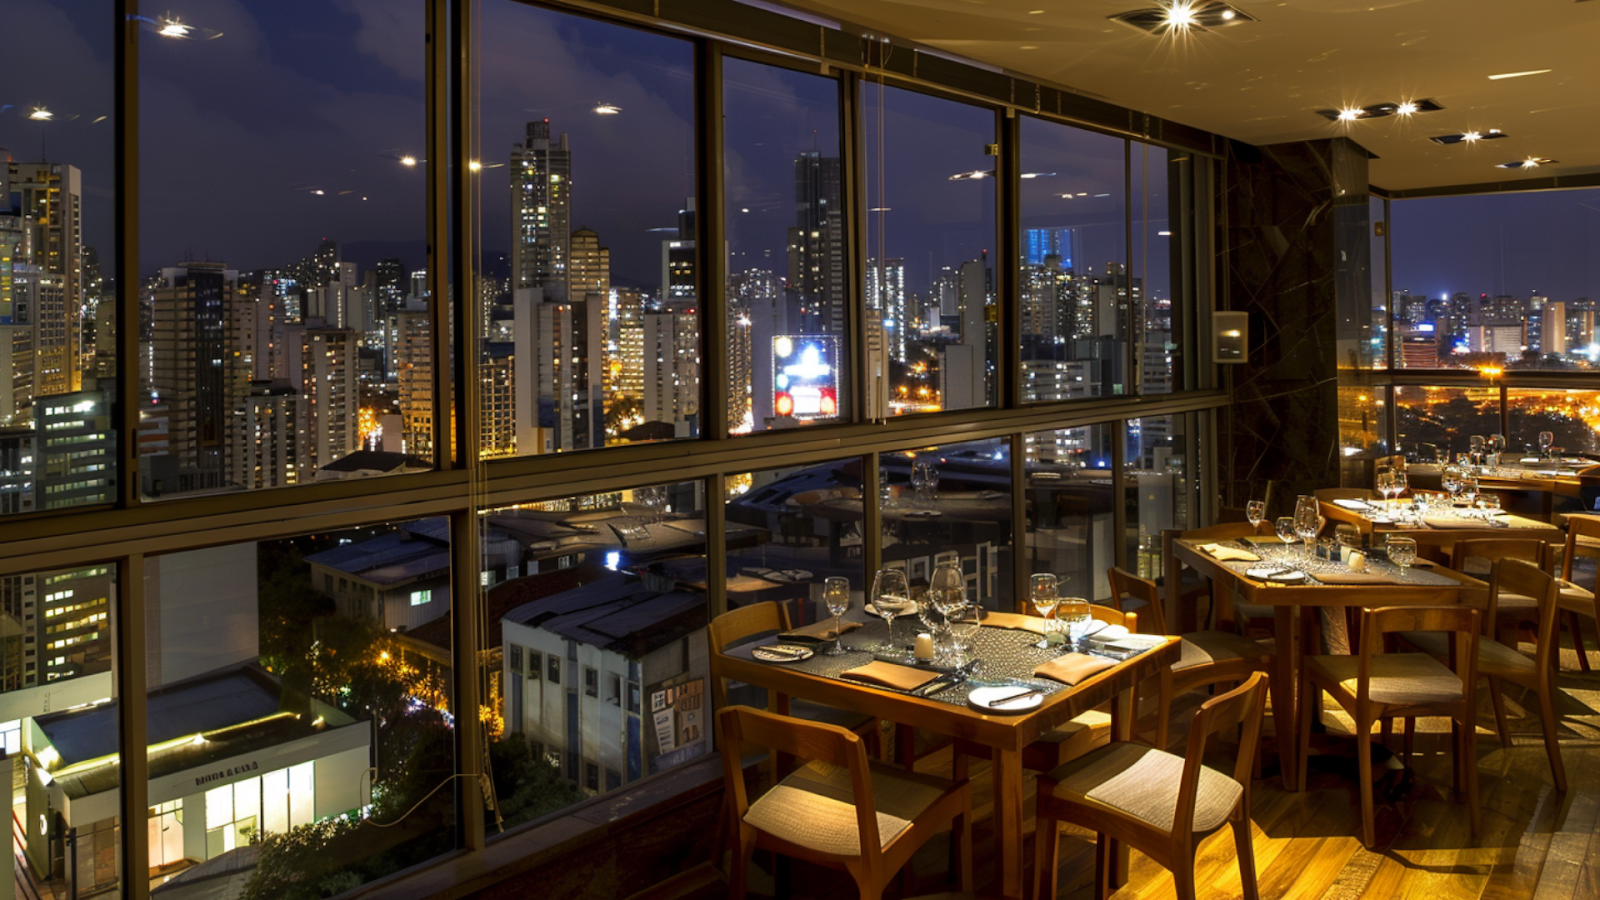 Floor-to-ceiling windows of an instagrammable restaurant with a view of the Sao Paulo cityscape at night